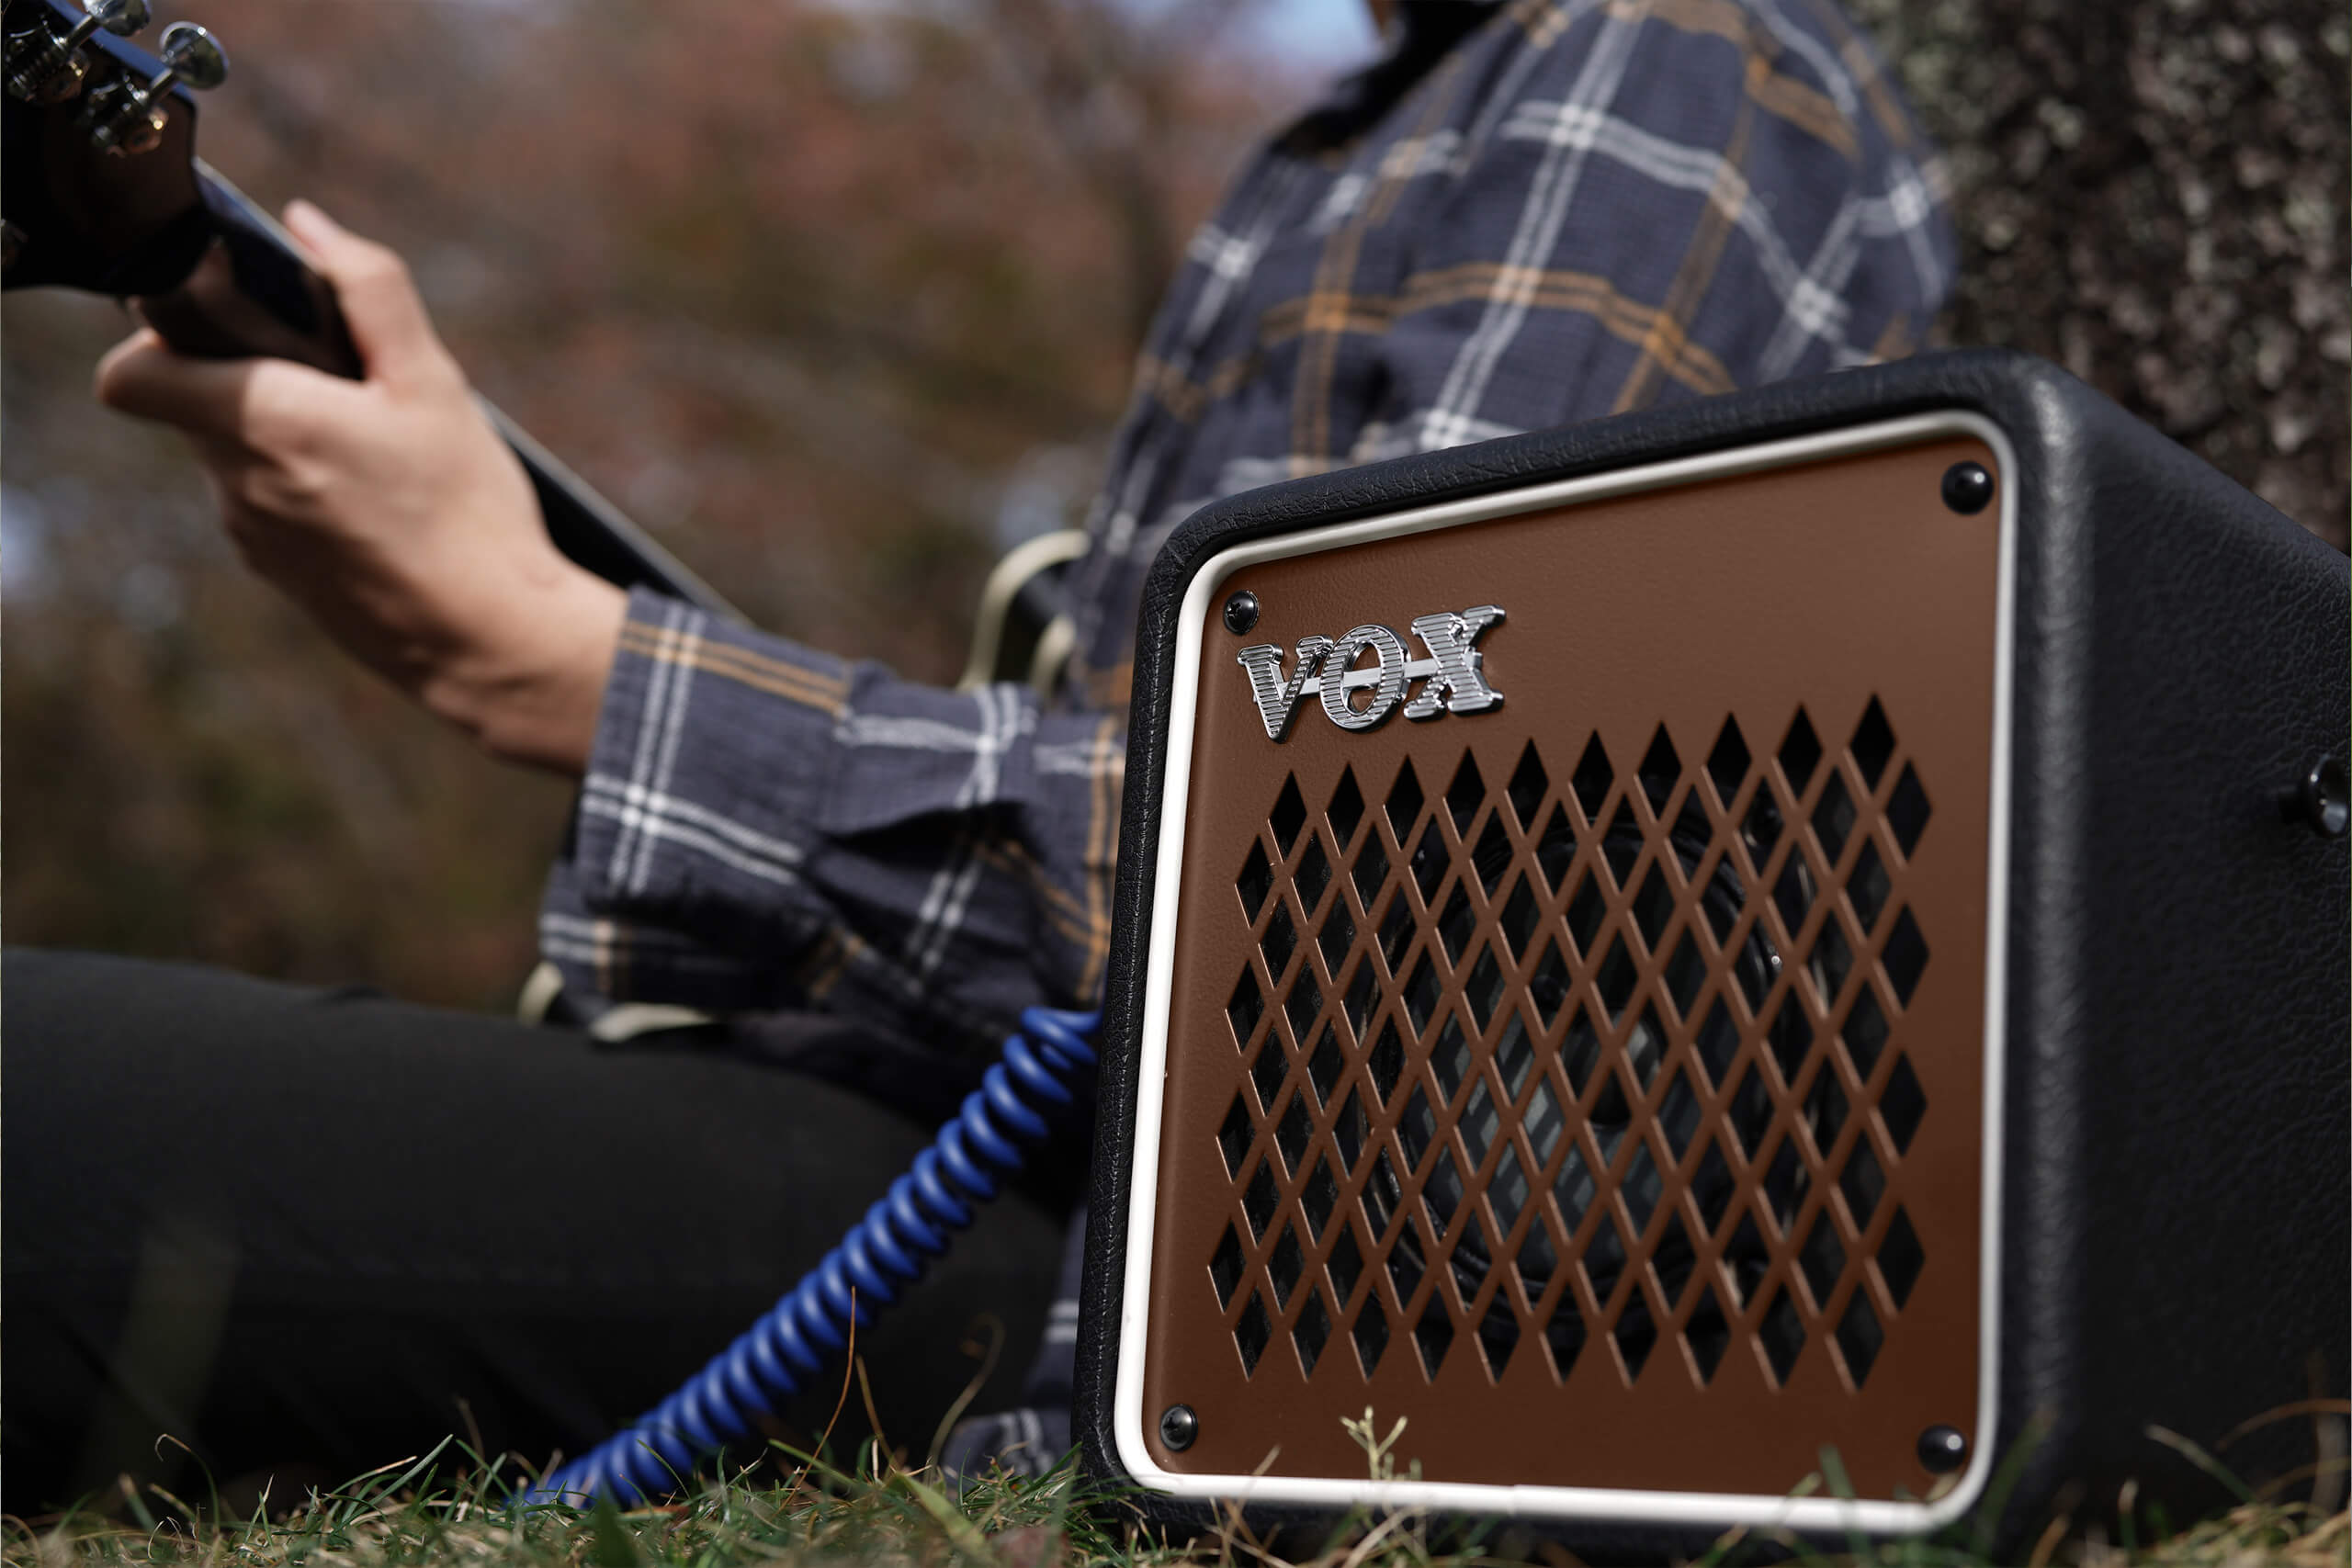 Vox mini go 10 earth brown on the ground with artist playing.